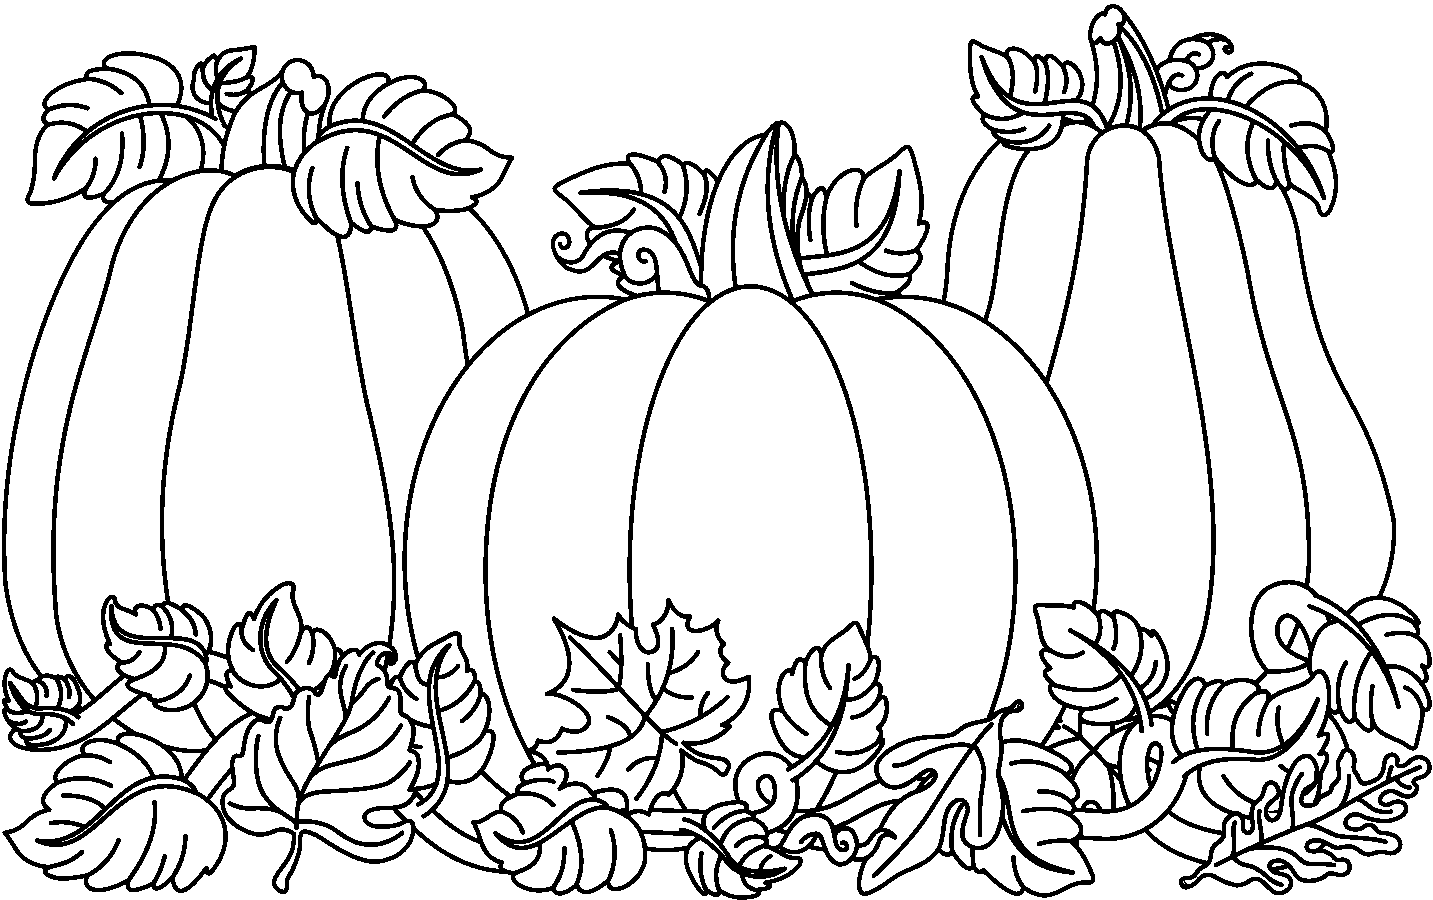 Pumpkin patch 0 images about halloween on autumn trees club clip art